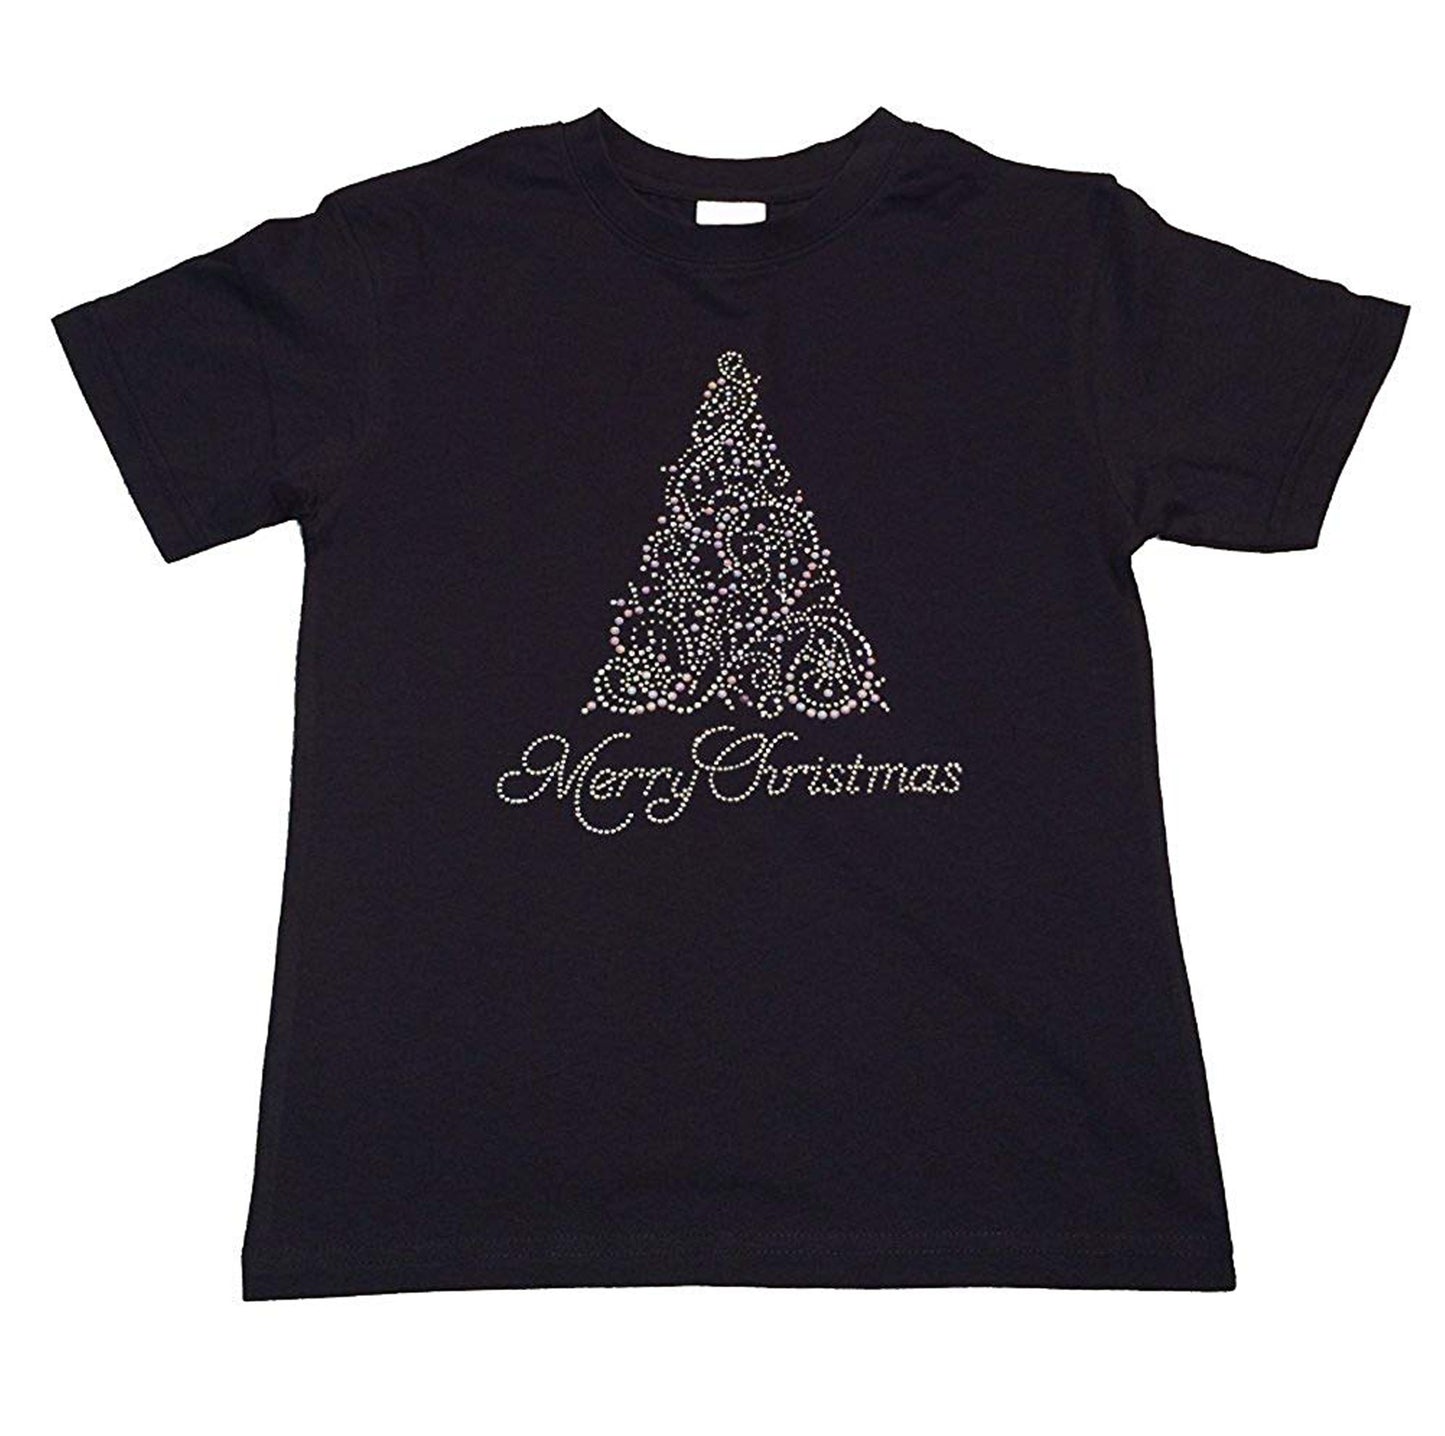 Girls Rhinestone T-Shirt " Merry Christmas Tree in Crystal and Pearl " Size 3 to 14 Available